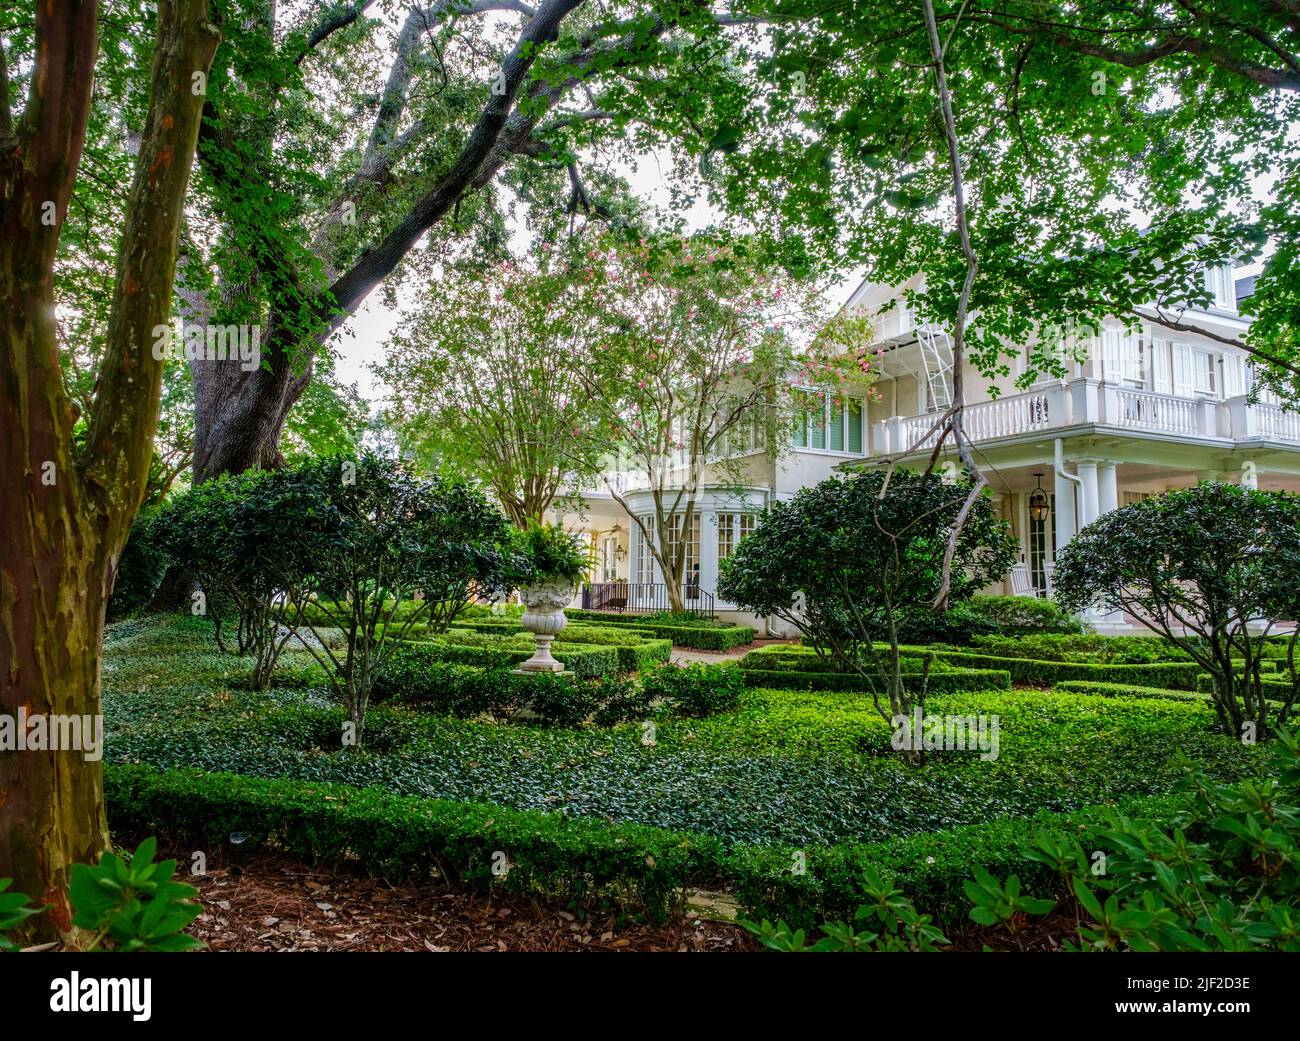 NEW ORLEANS, LA, USA - JUNE 27, 2022: Well manicured garden and side of mansion in Uptown neighborhood Stock Photo